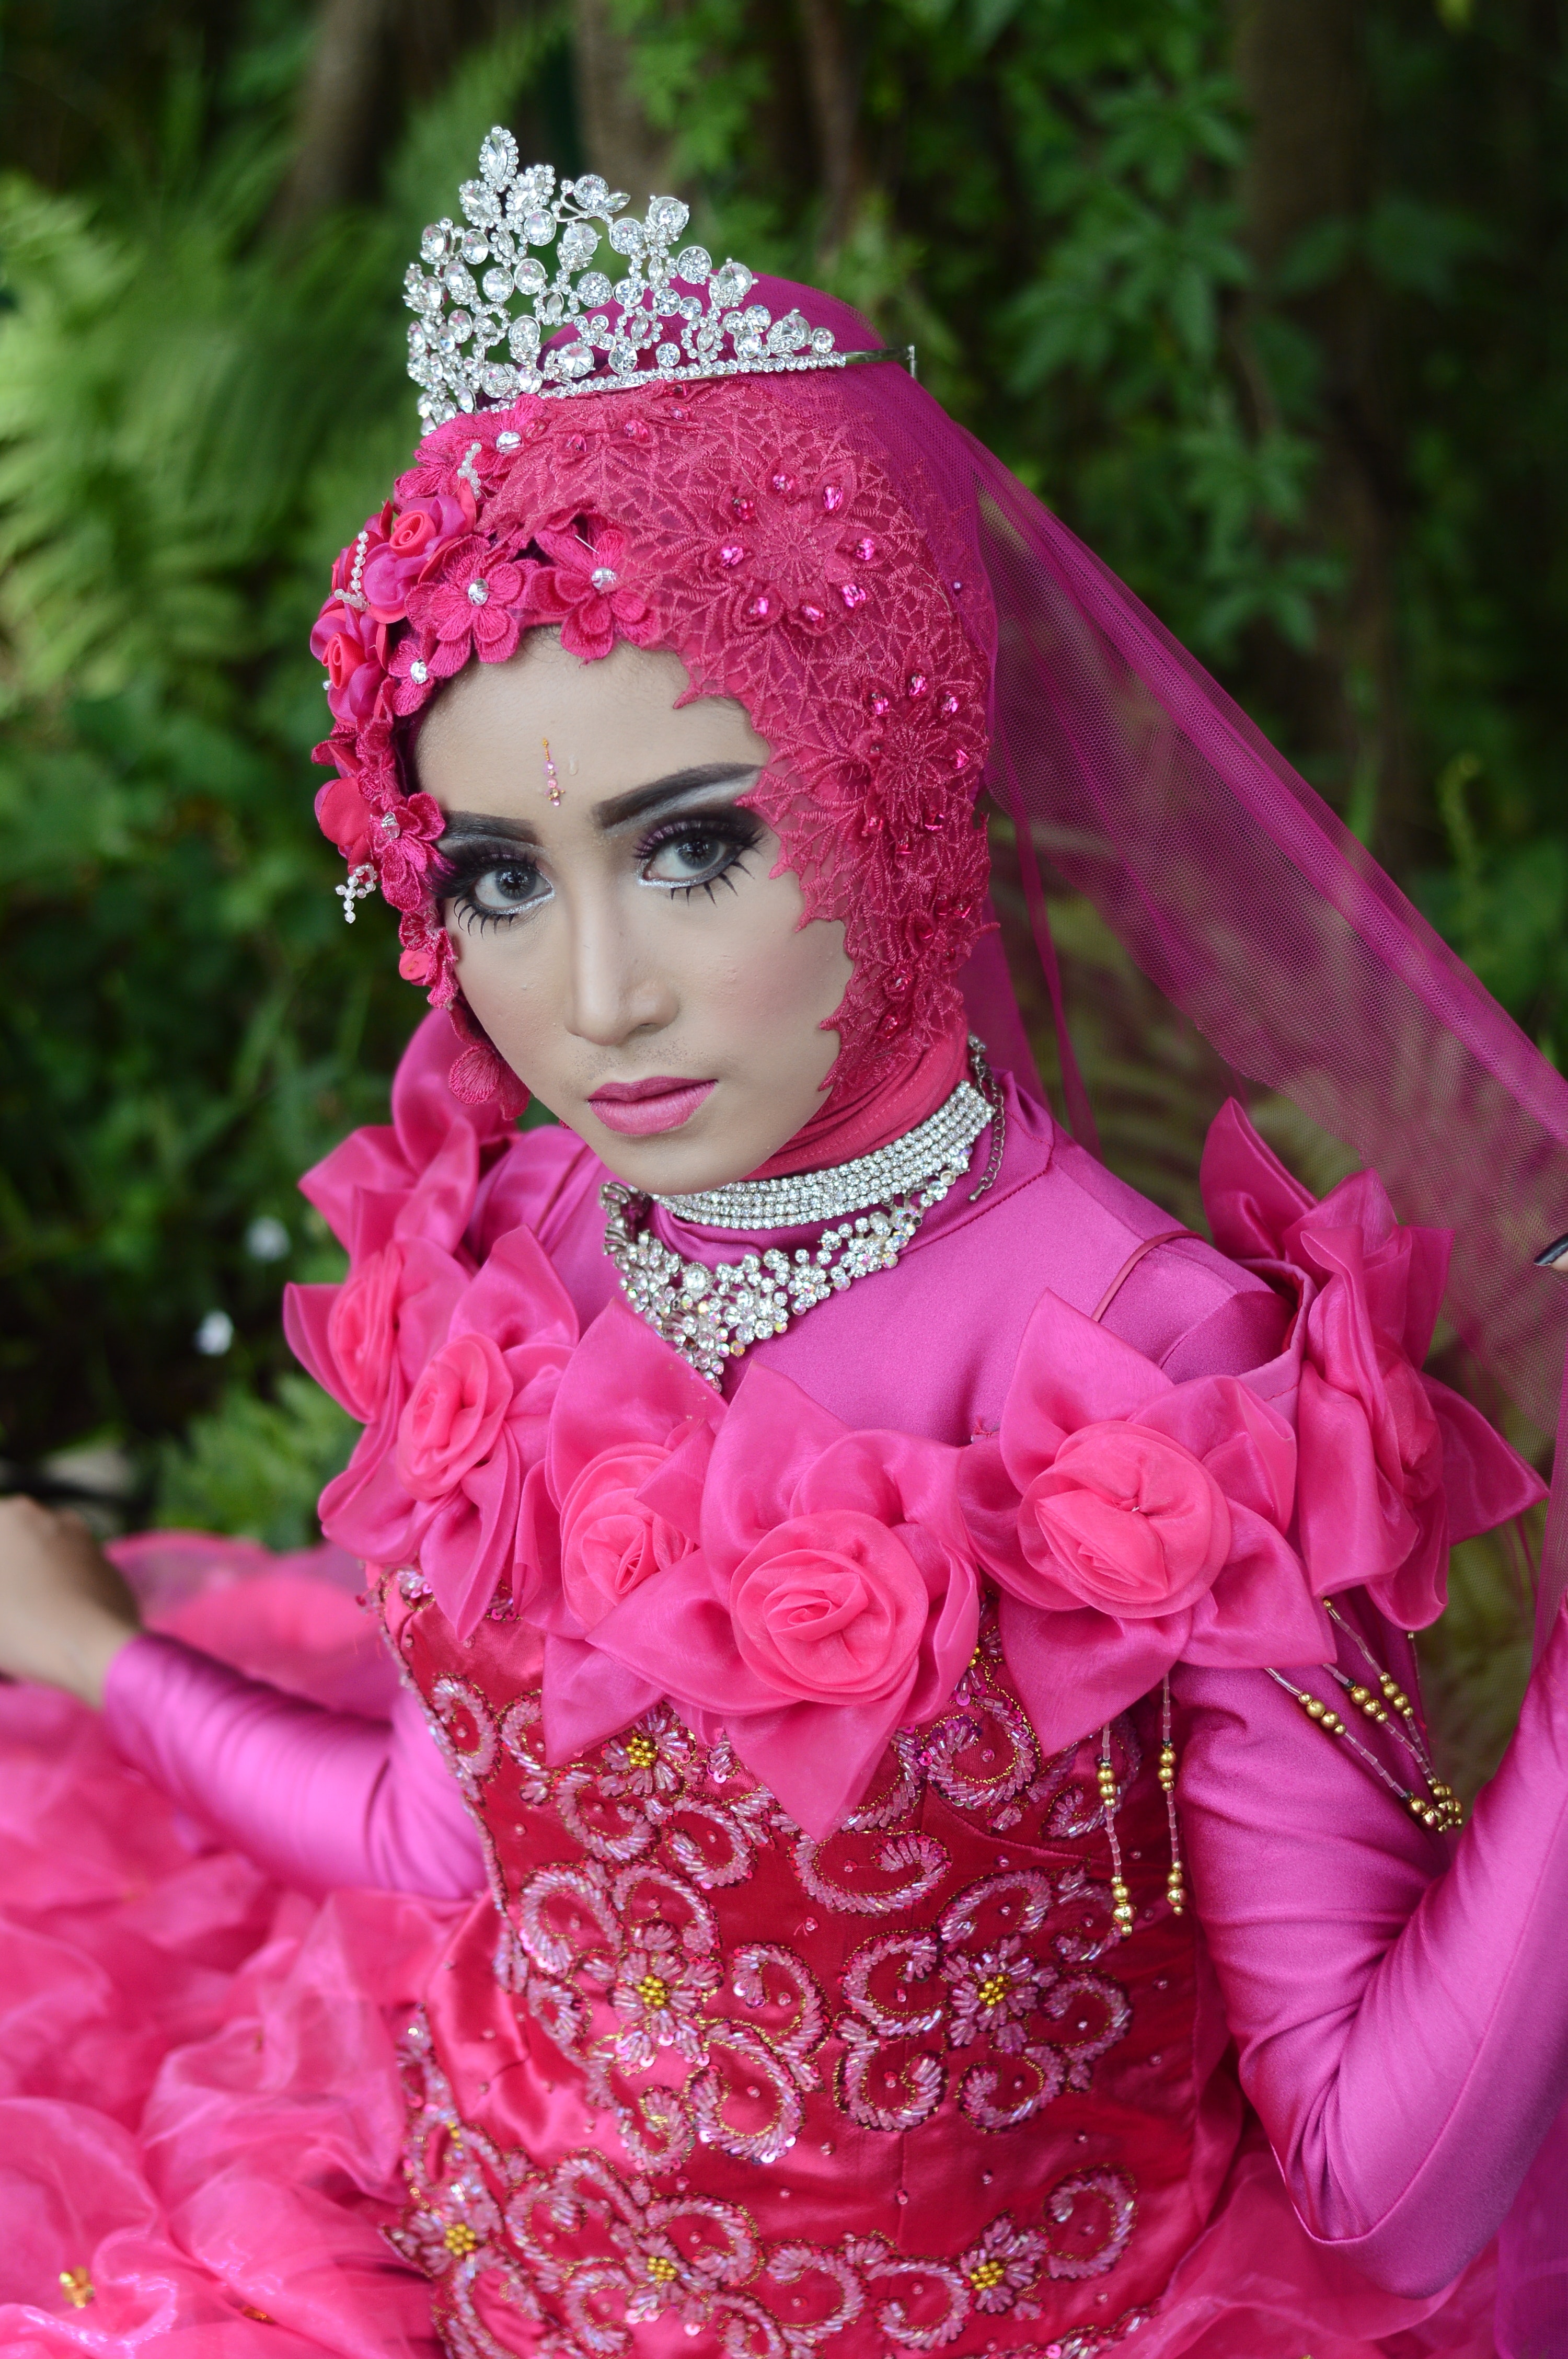 Free photo: Woman Wears Pink Long-sleeved Dress With Crown - Beautiful ...